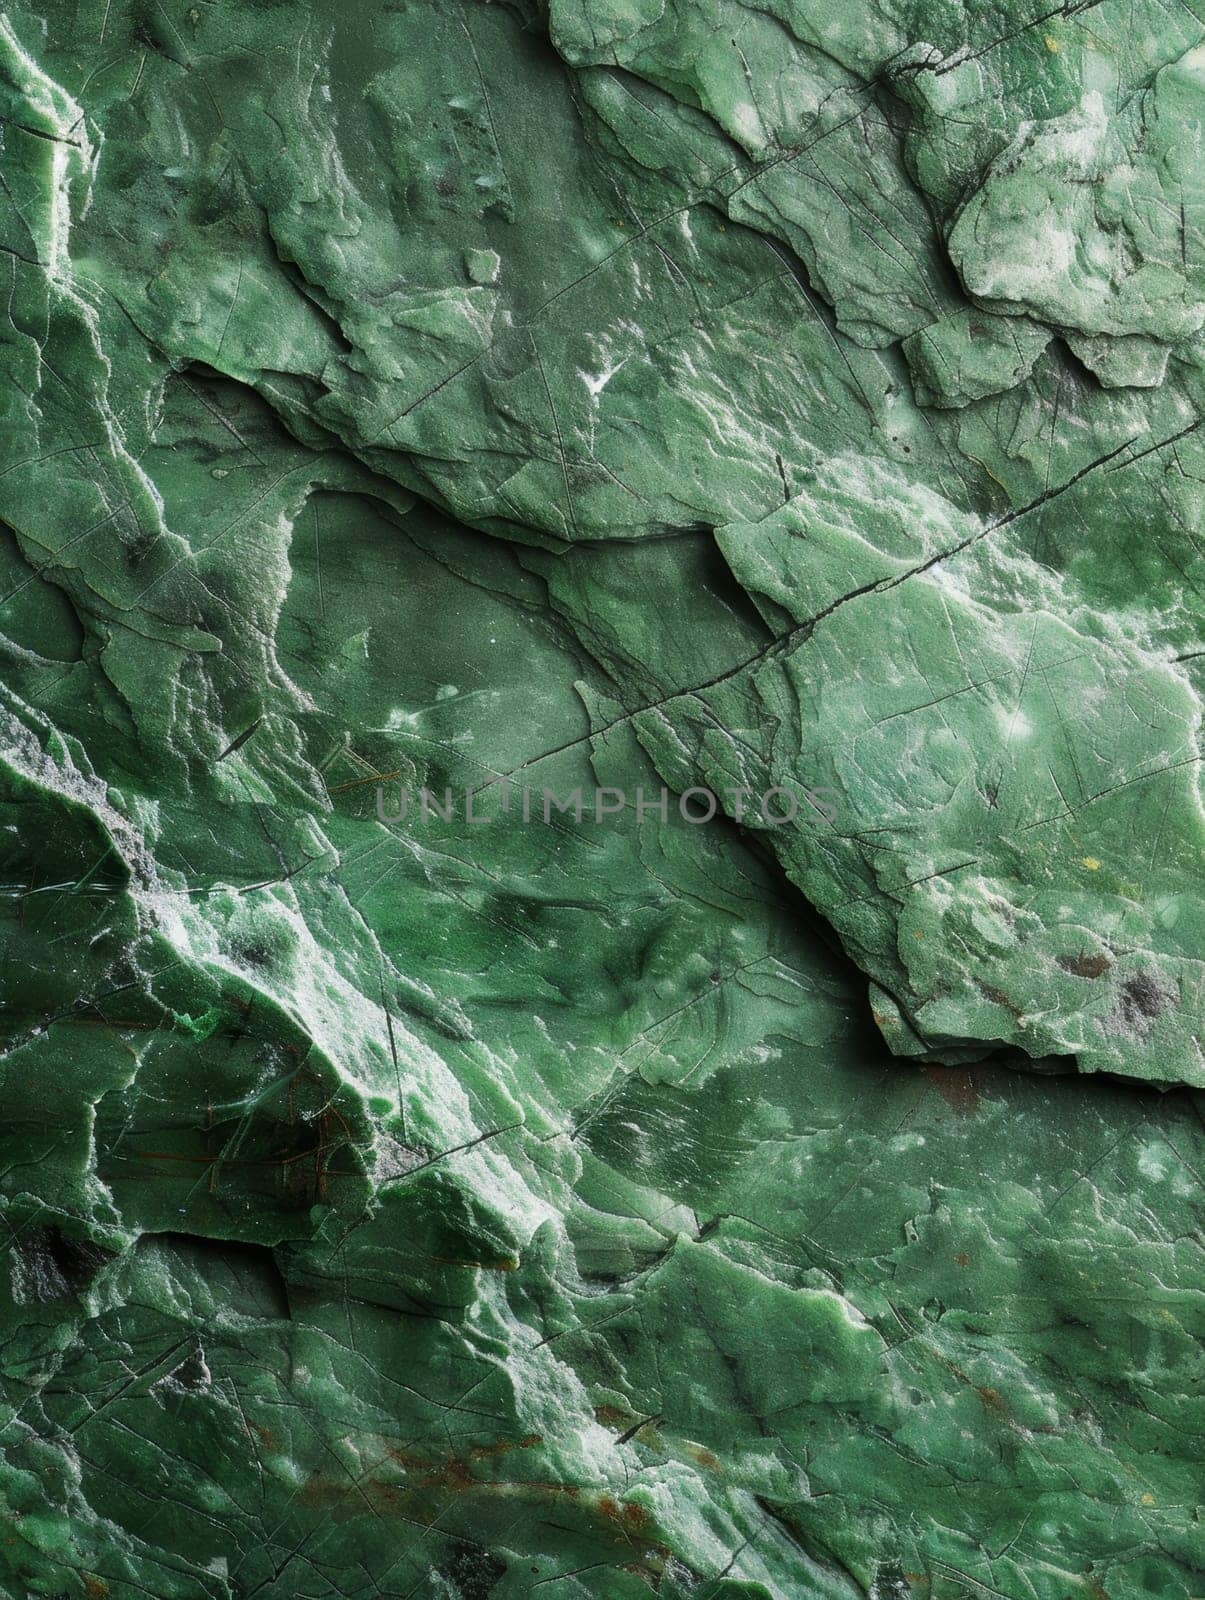 Overlapping green stone shards form a dense mosaic texture